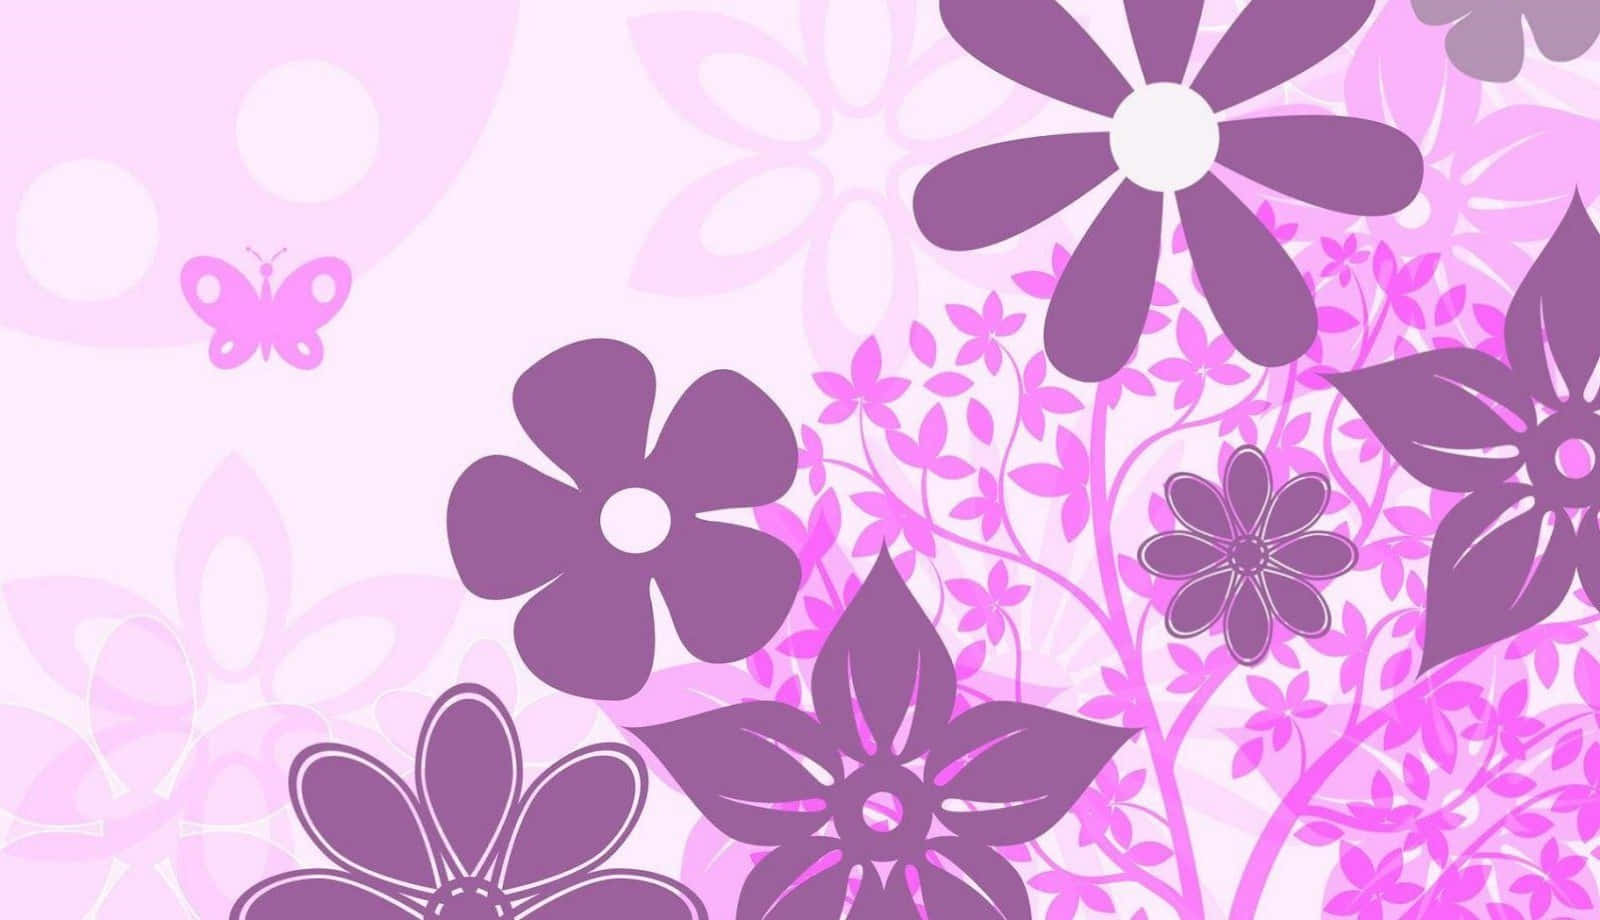 A picture of a lovely pink and purple flower growing in a lush garden. Wallpaper